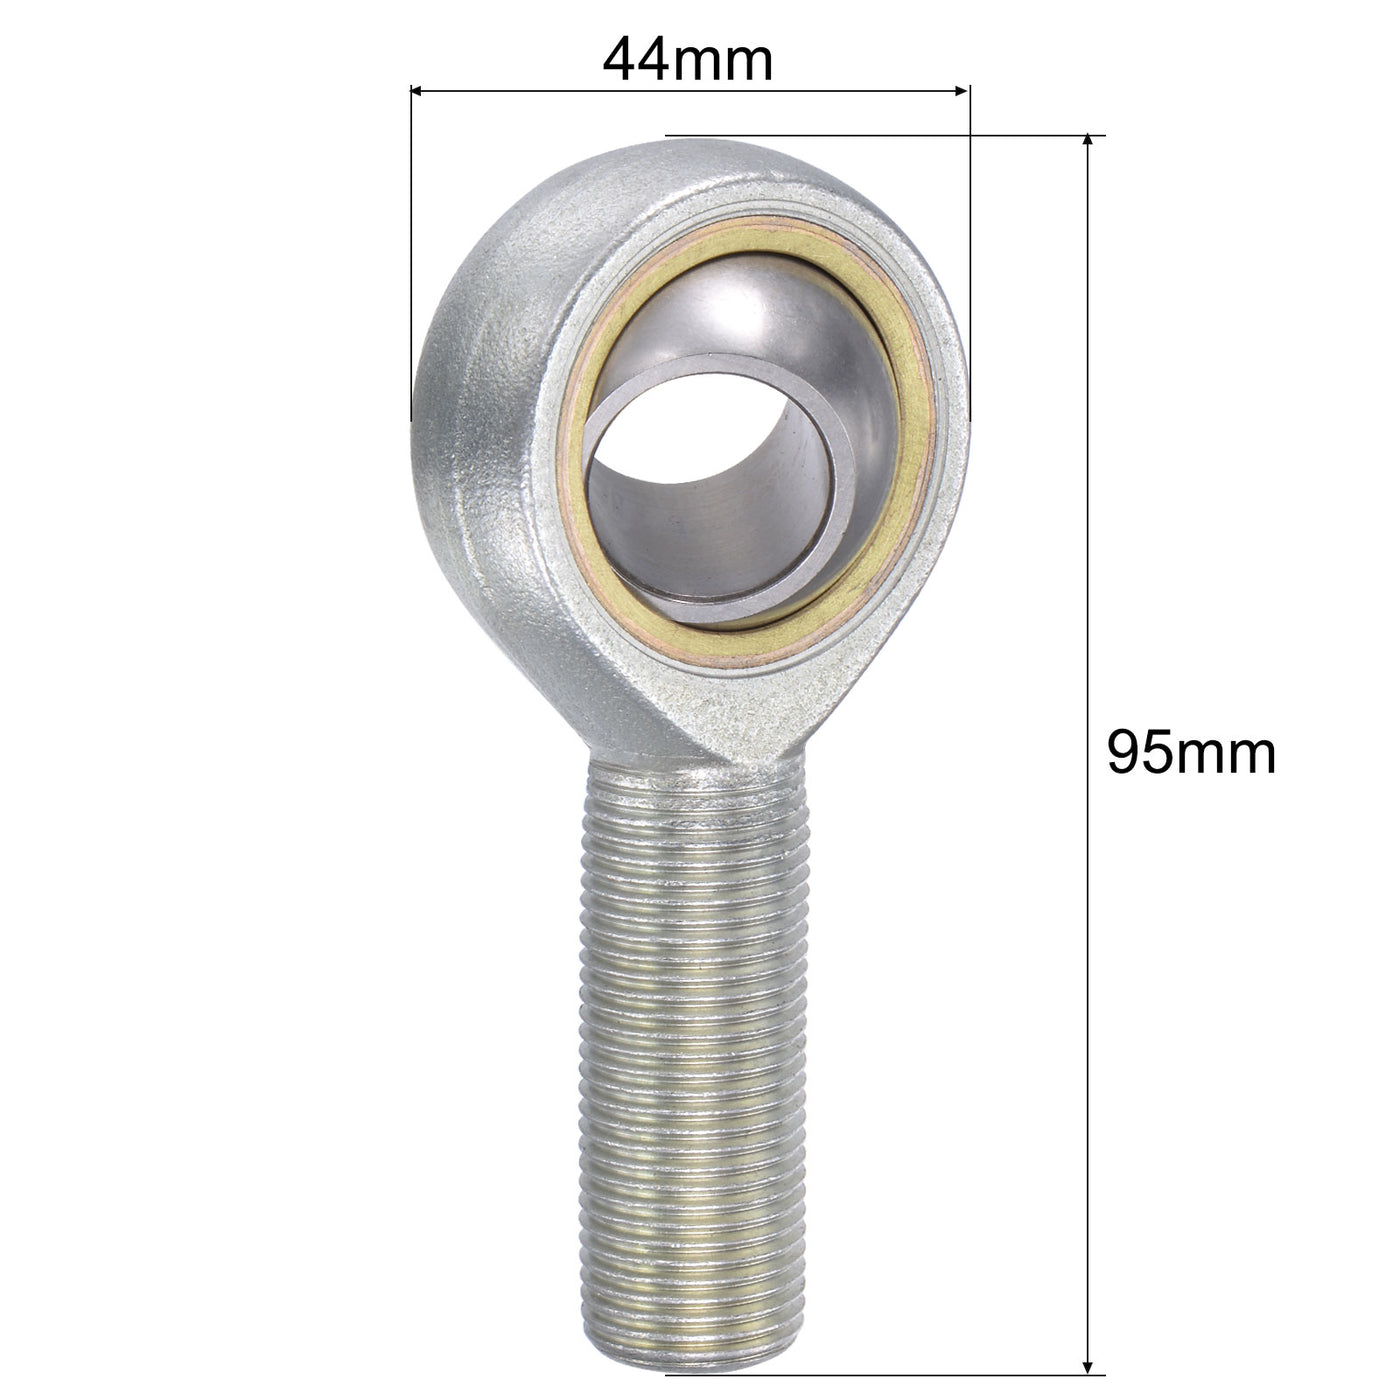 uxcell Uxcell SA18TK POSA18 Rod End Bearing 18mm Bore M18x1.5 Right Hand Male Thread